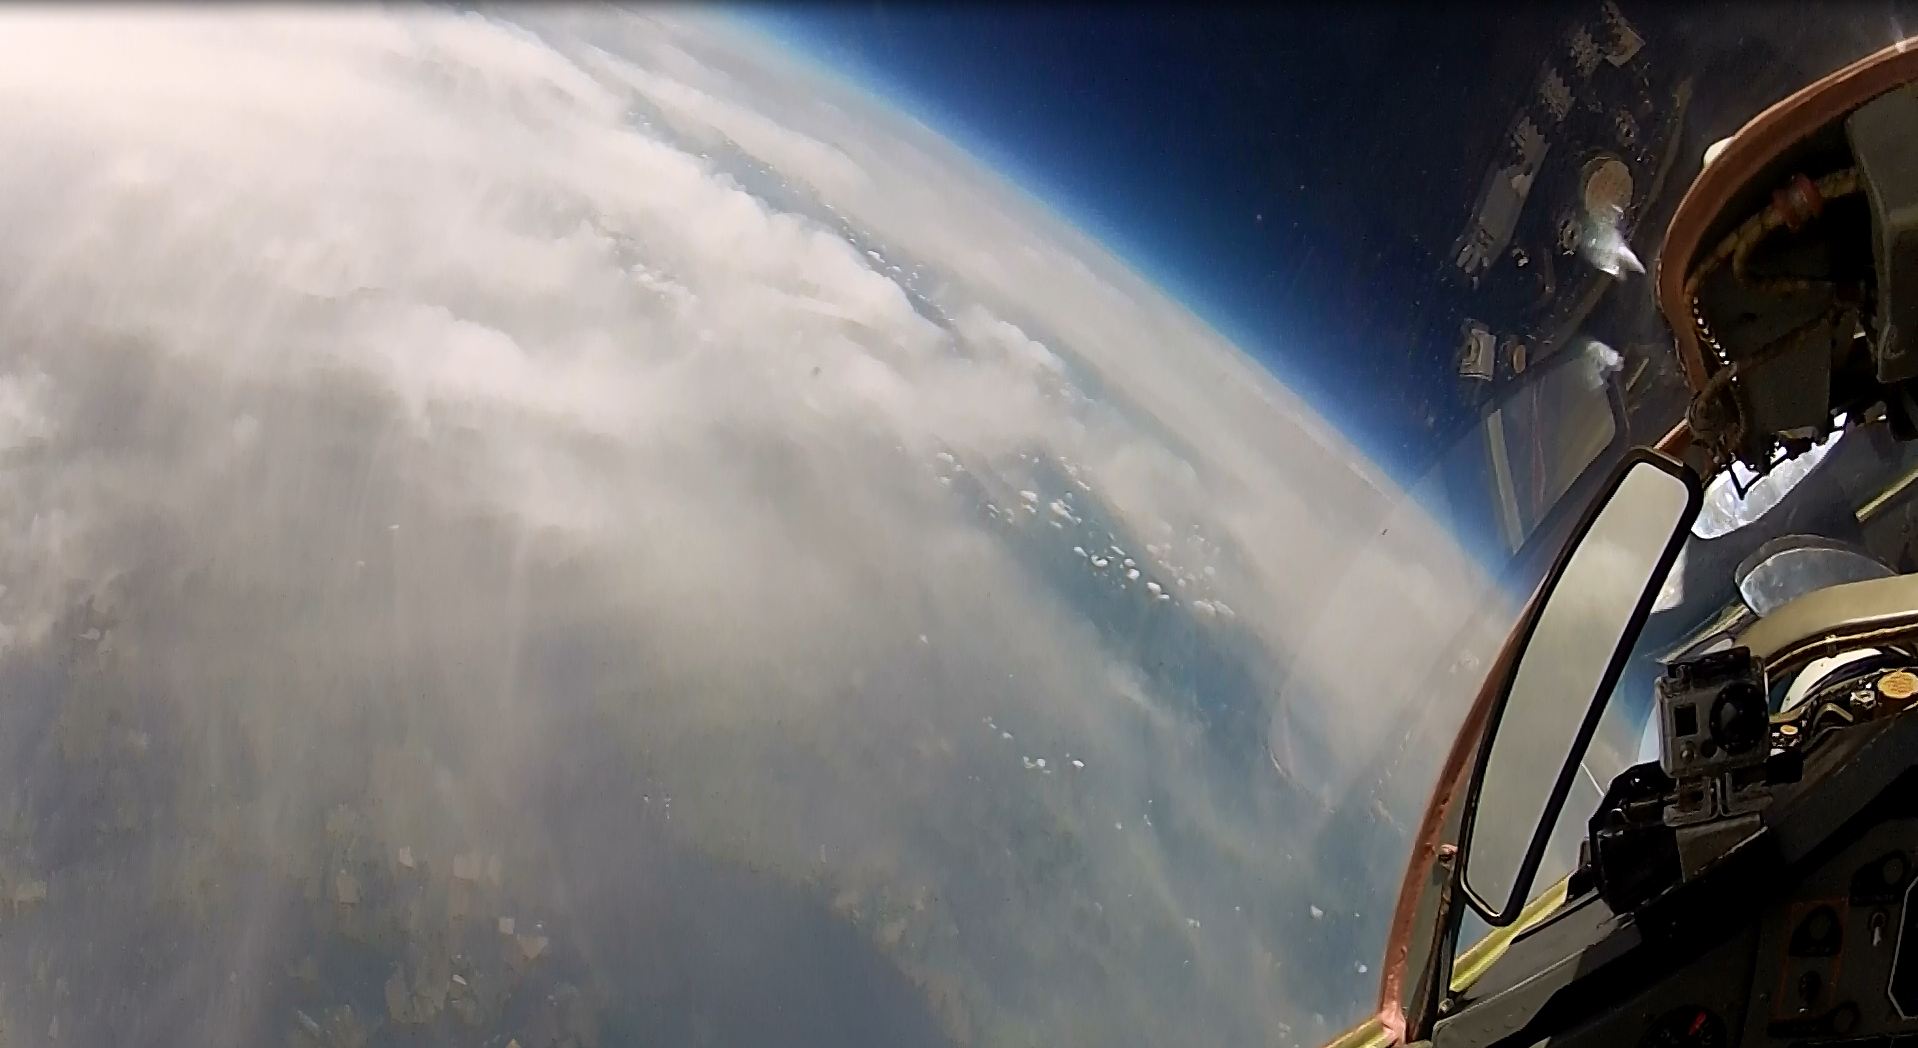 Edge of Space in MiG29 Fulcrum in Russia! Fighter Jet Rides